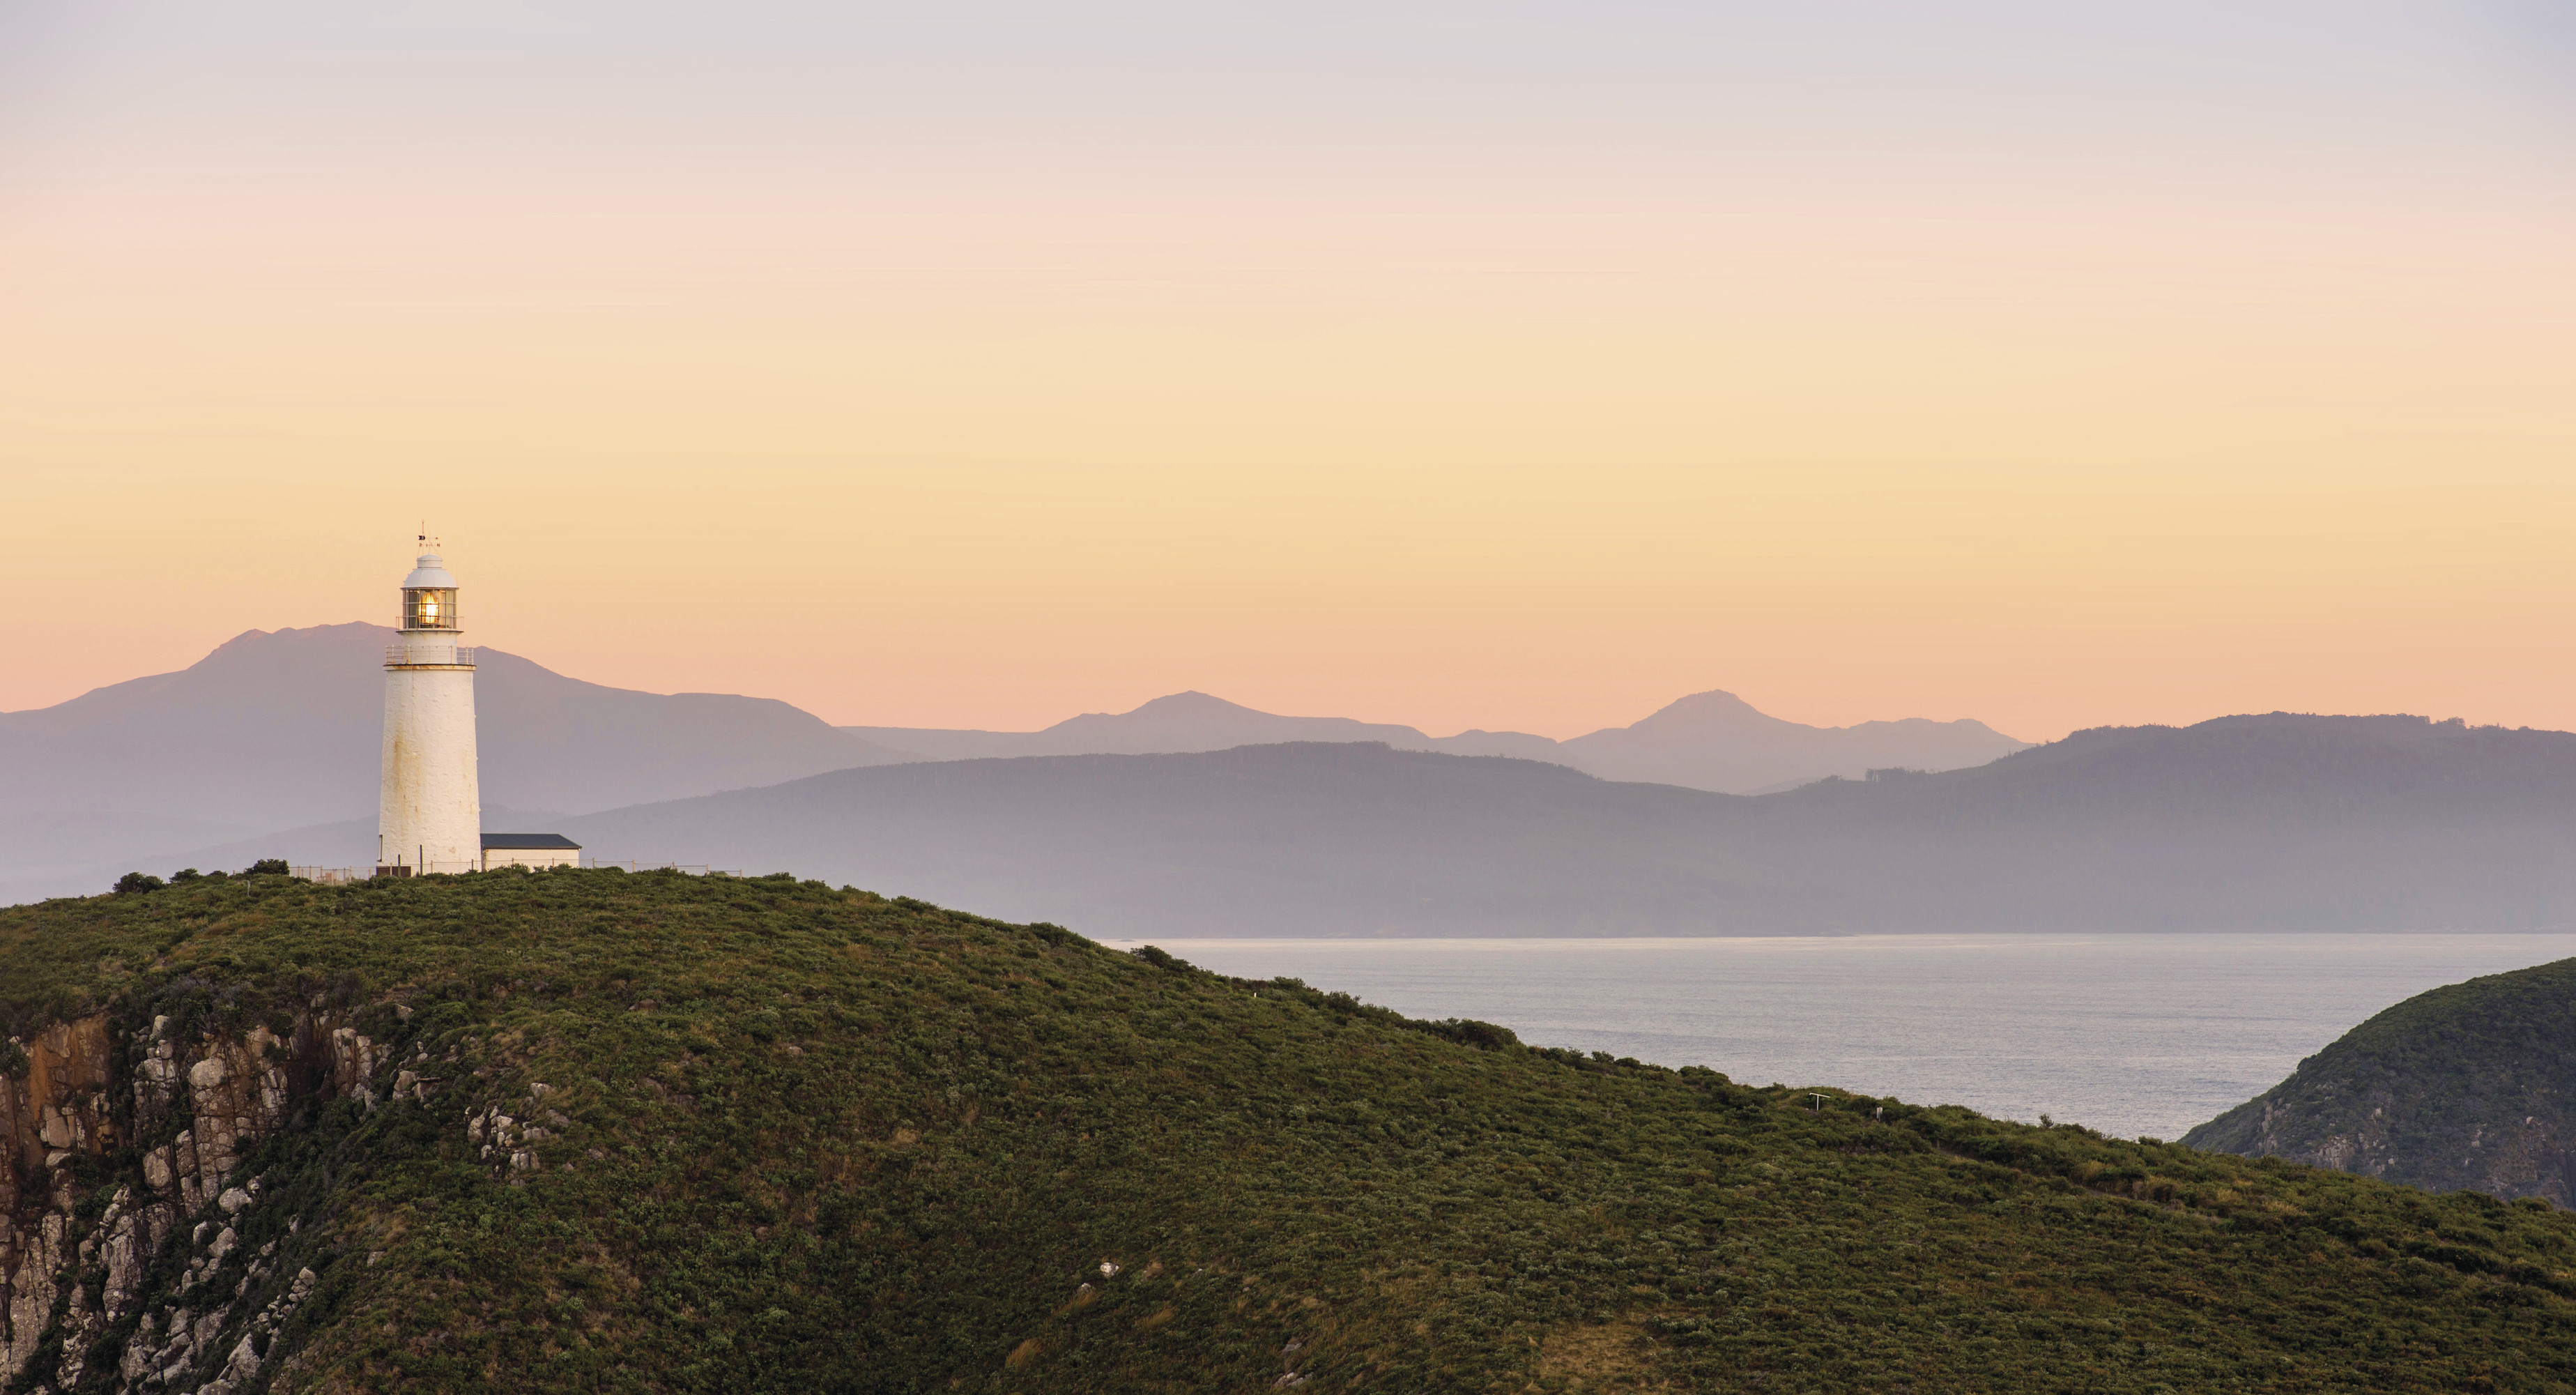 Stunning landscape image of Cape Bruny Lighthouse on sunset, with the ocean and mountains lie in the background.